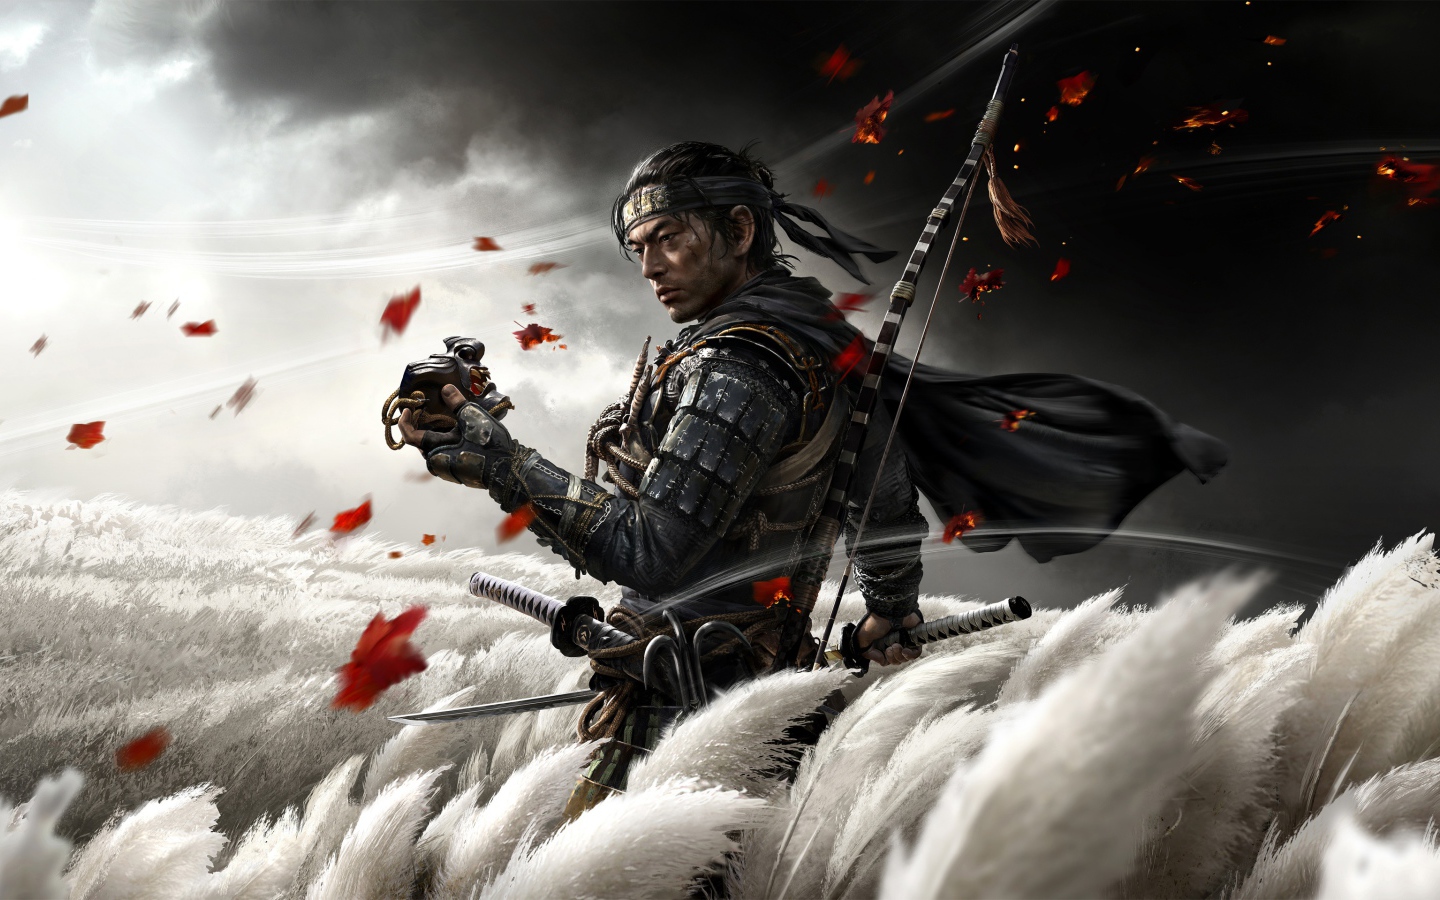 Samurai from the computer game Ghost of Tsushima, 2020